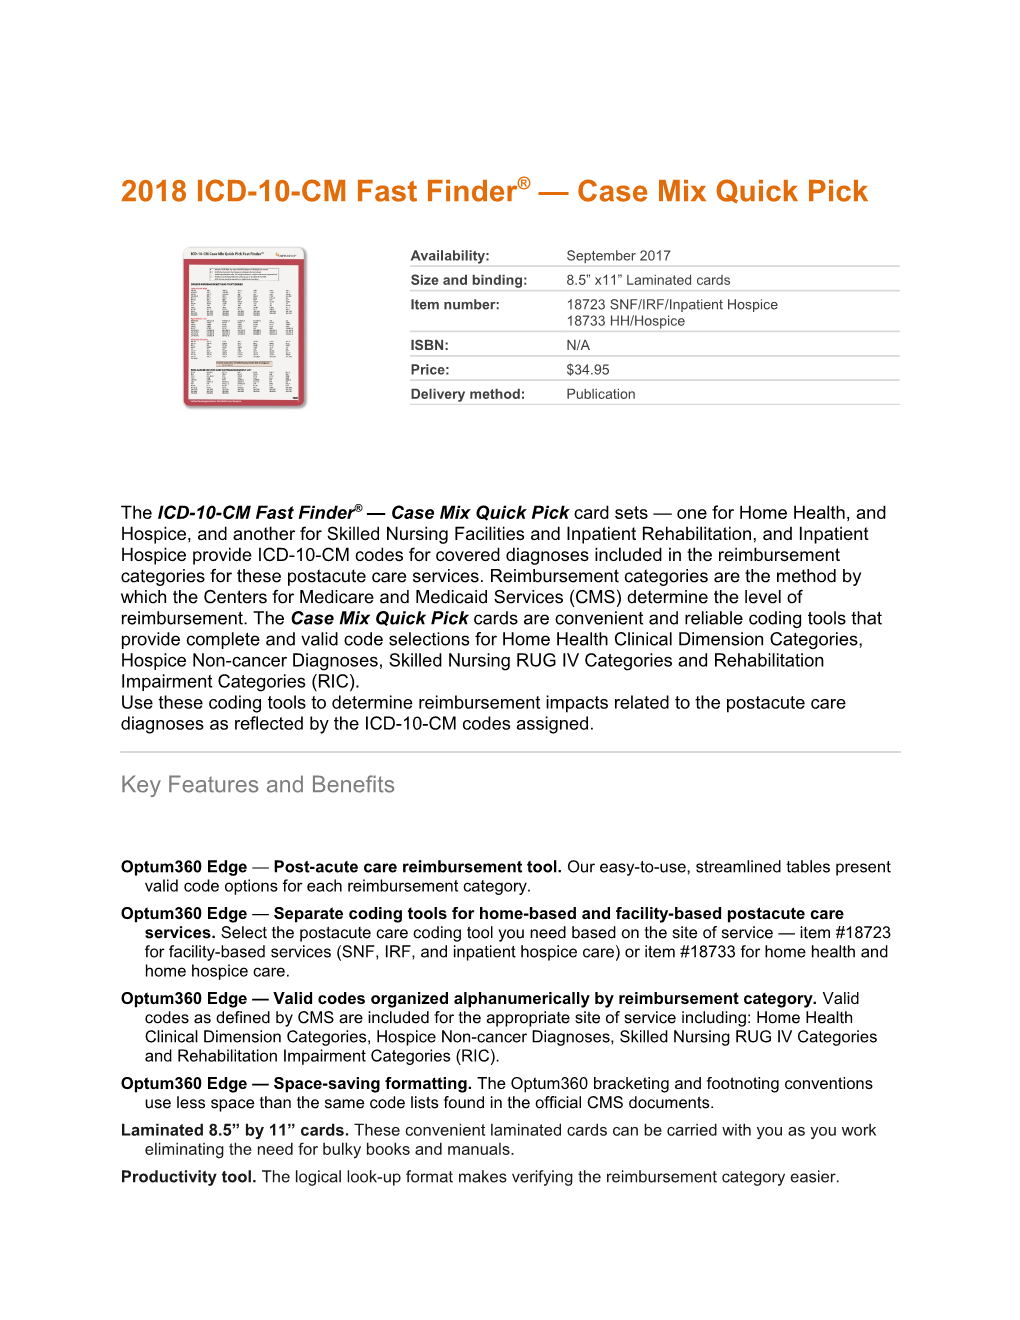 2018 ICD-10-CM Fast Finder Case Mix Quick Pick